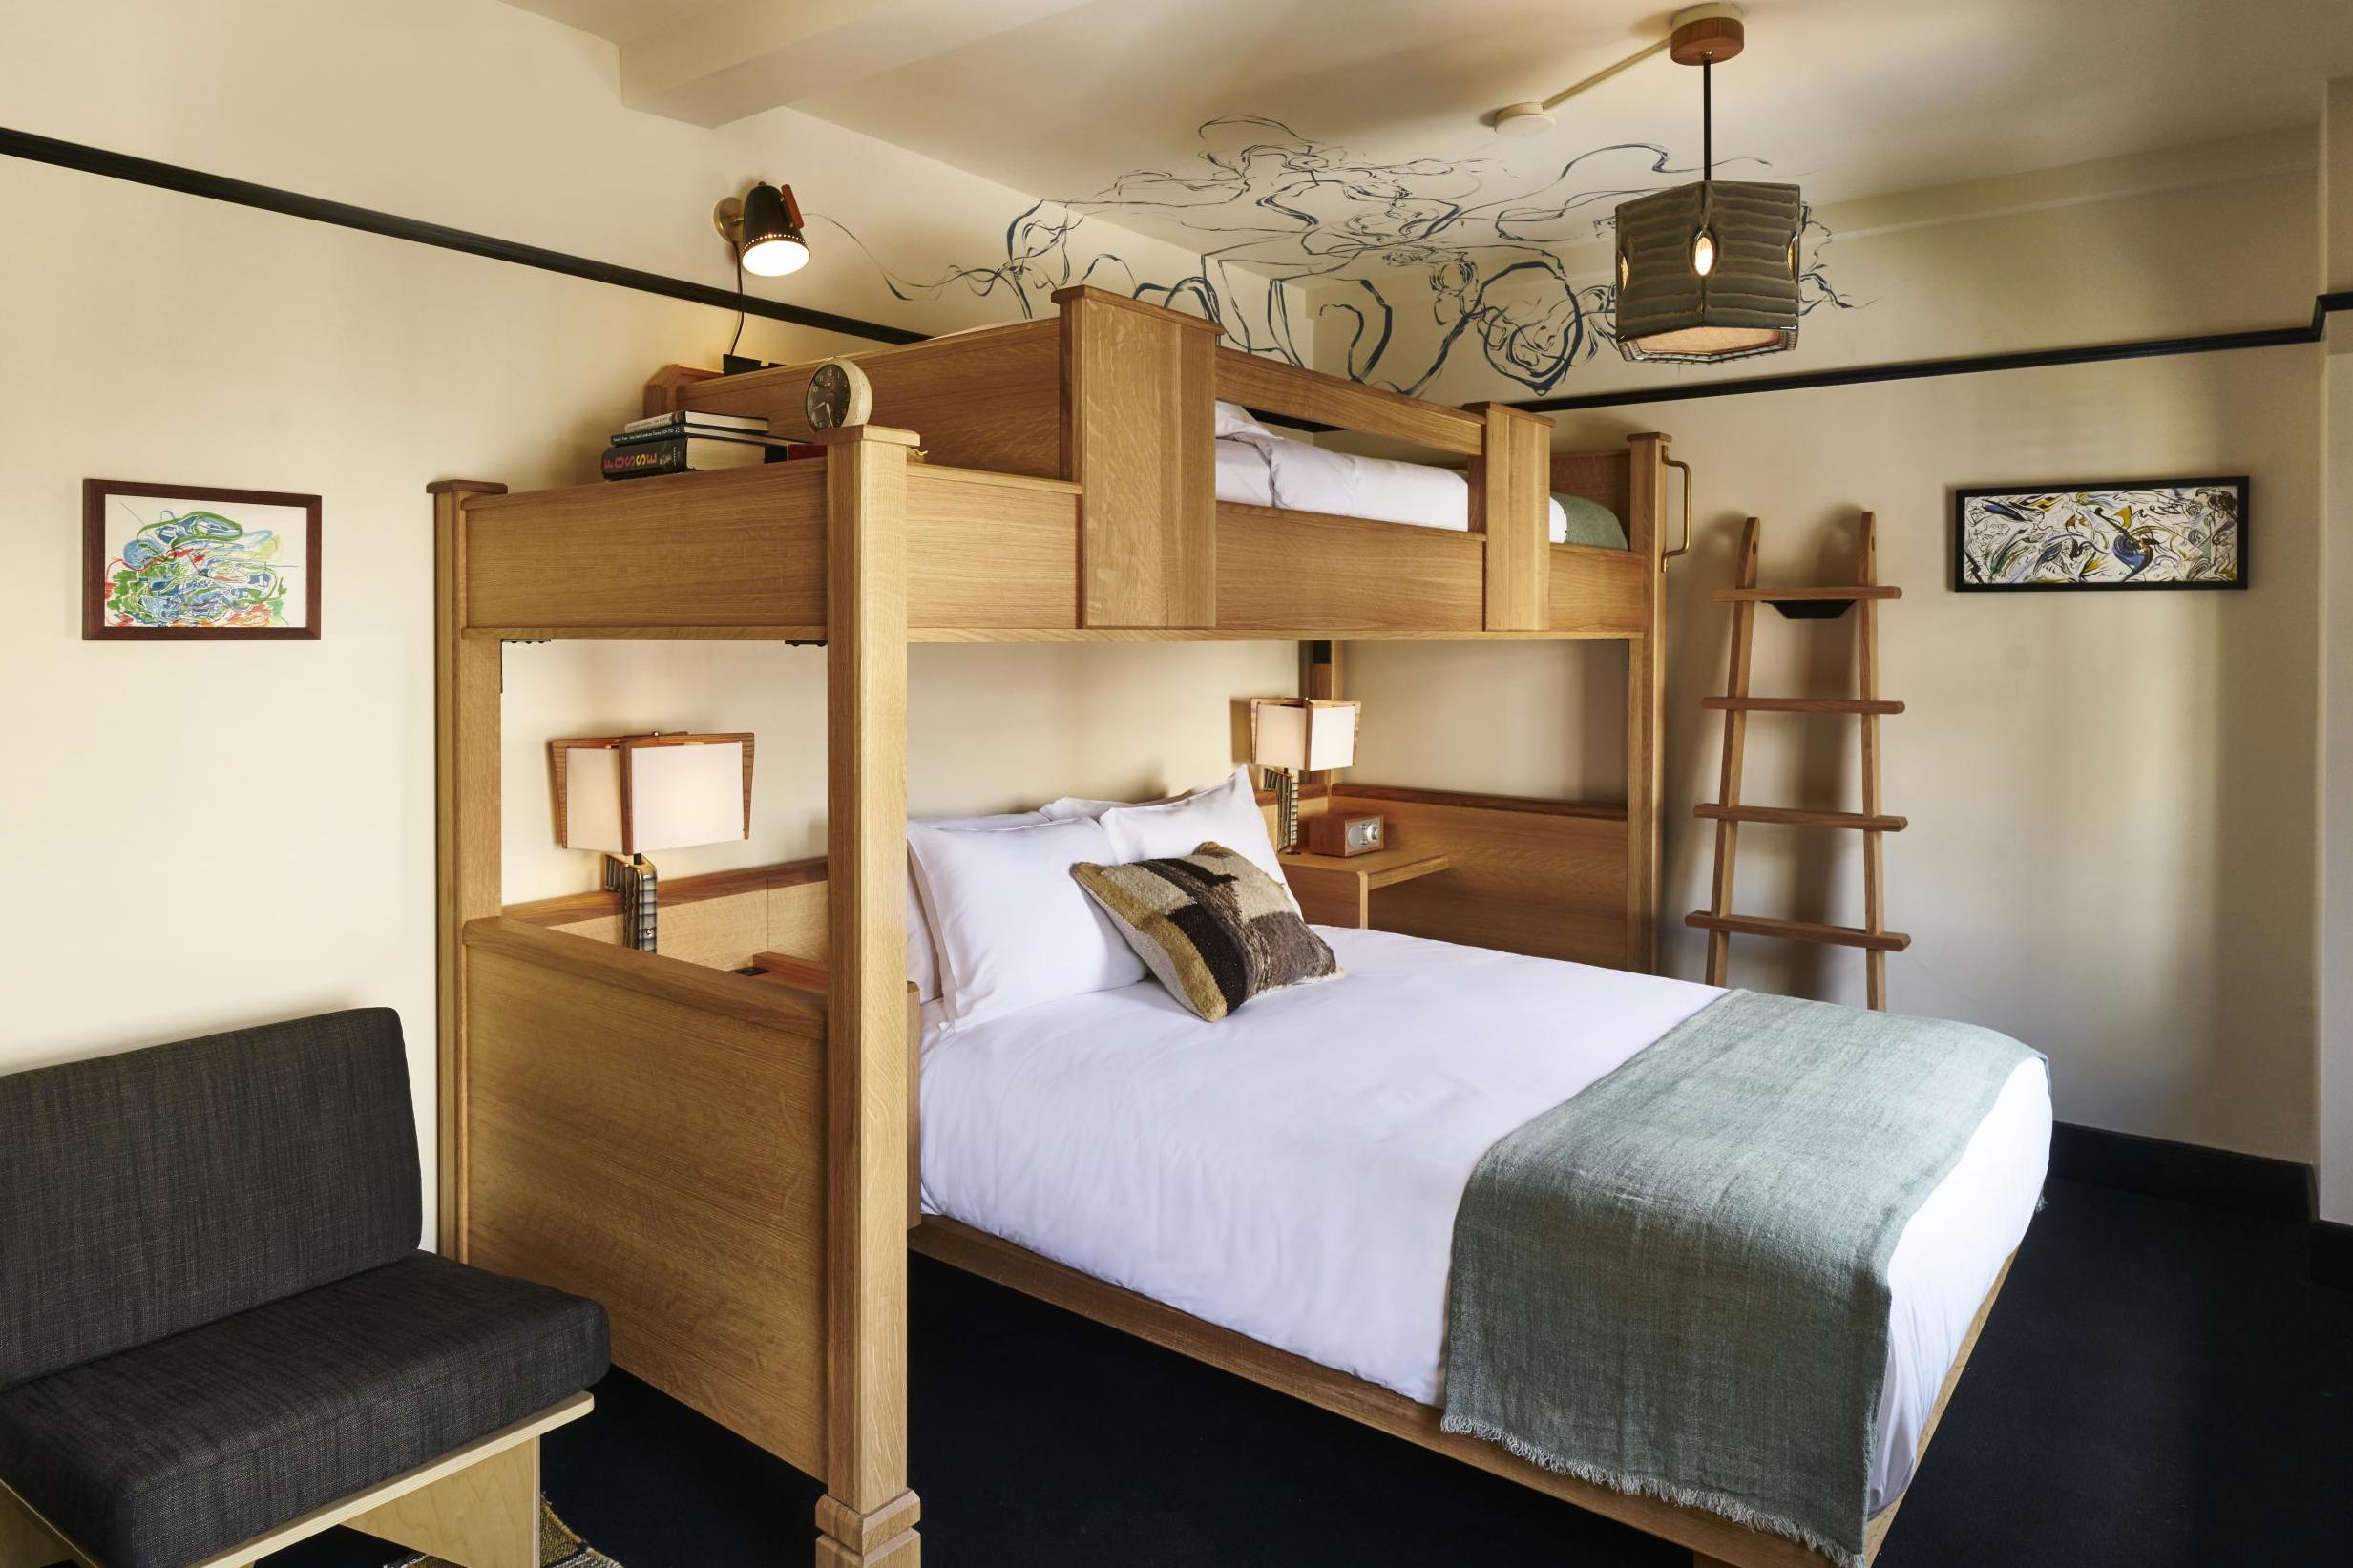 The Three's Company room at Freehand: a single bunk above a double-bed